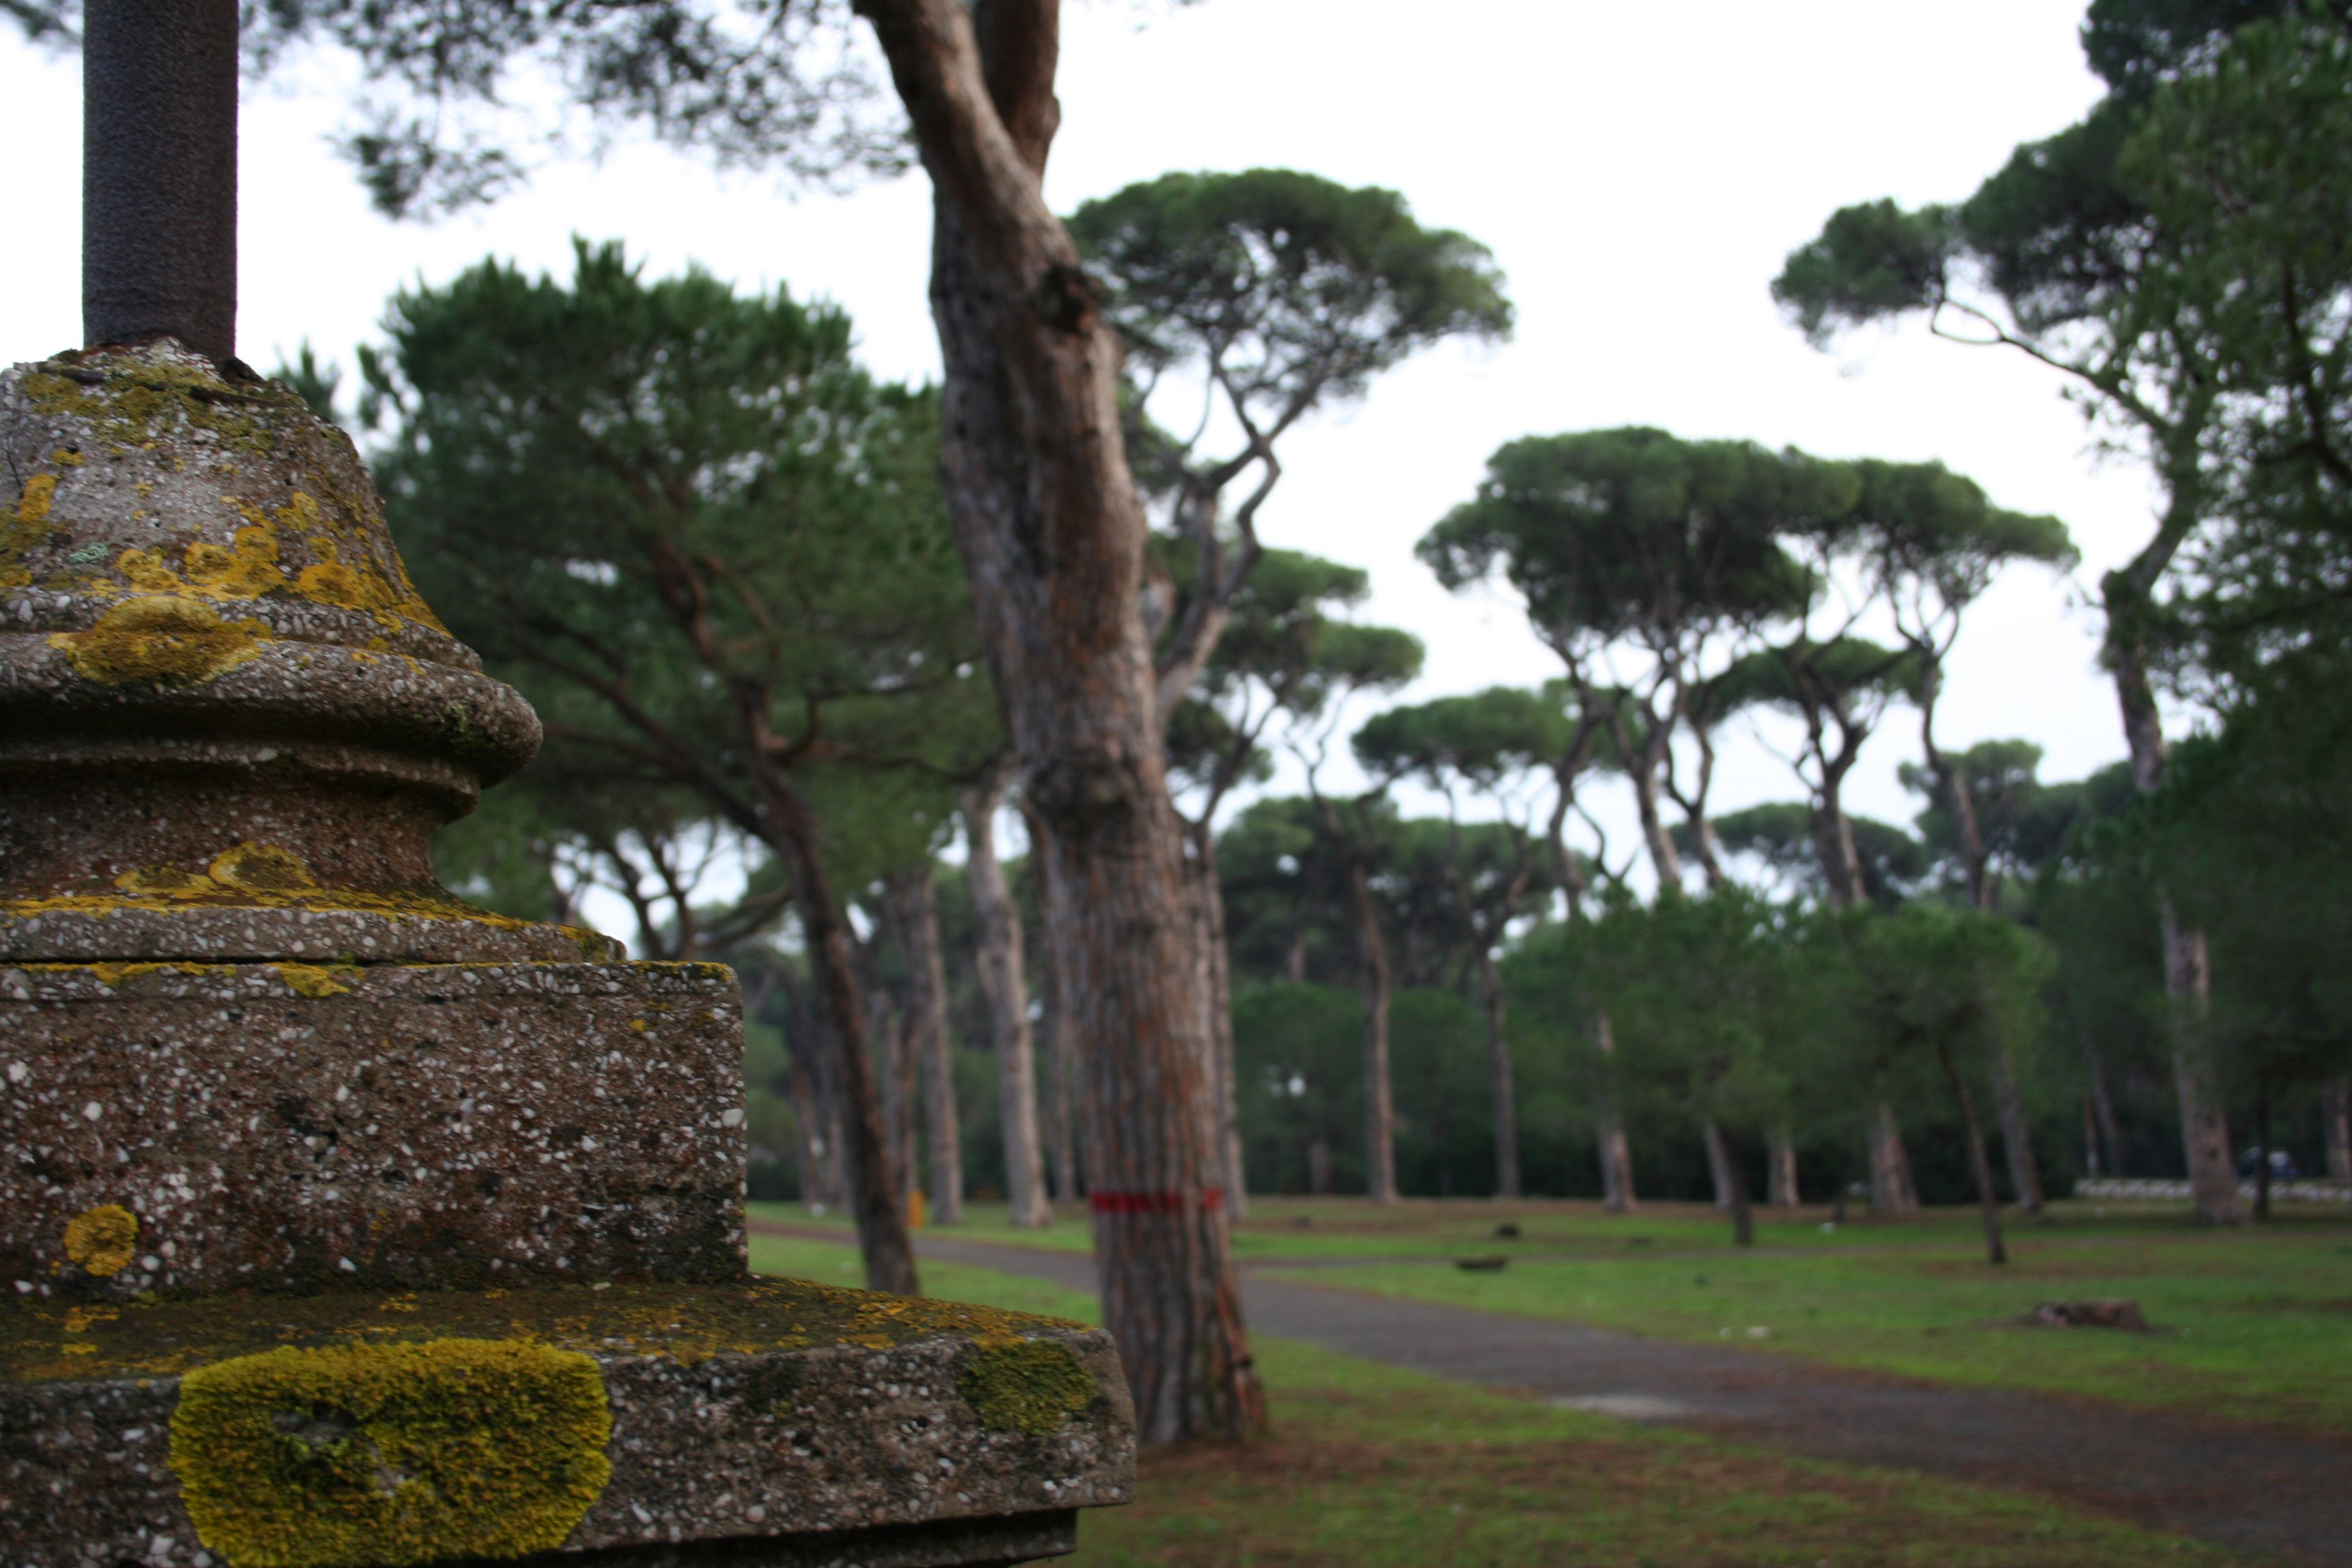 Relive the Dolce Vita in the pine forest of Fregene